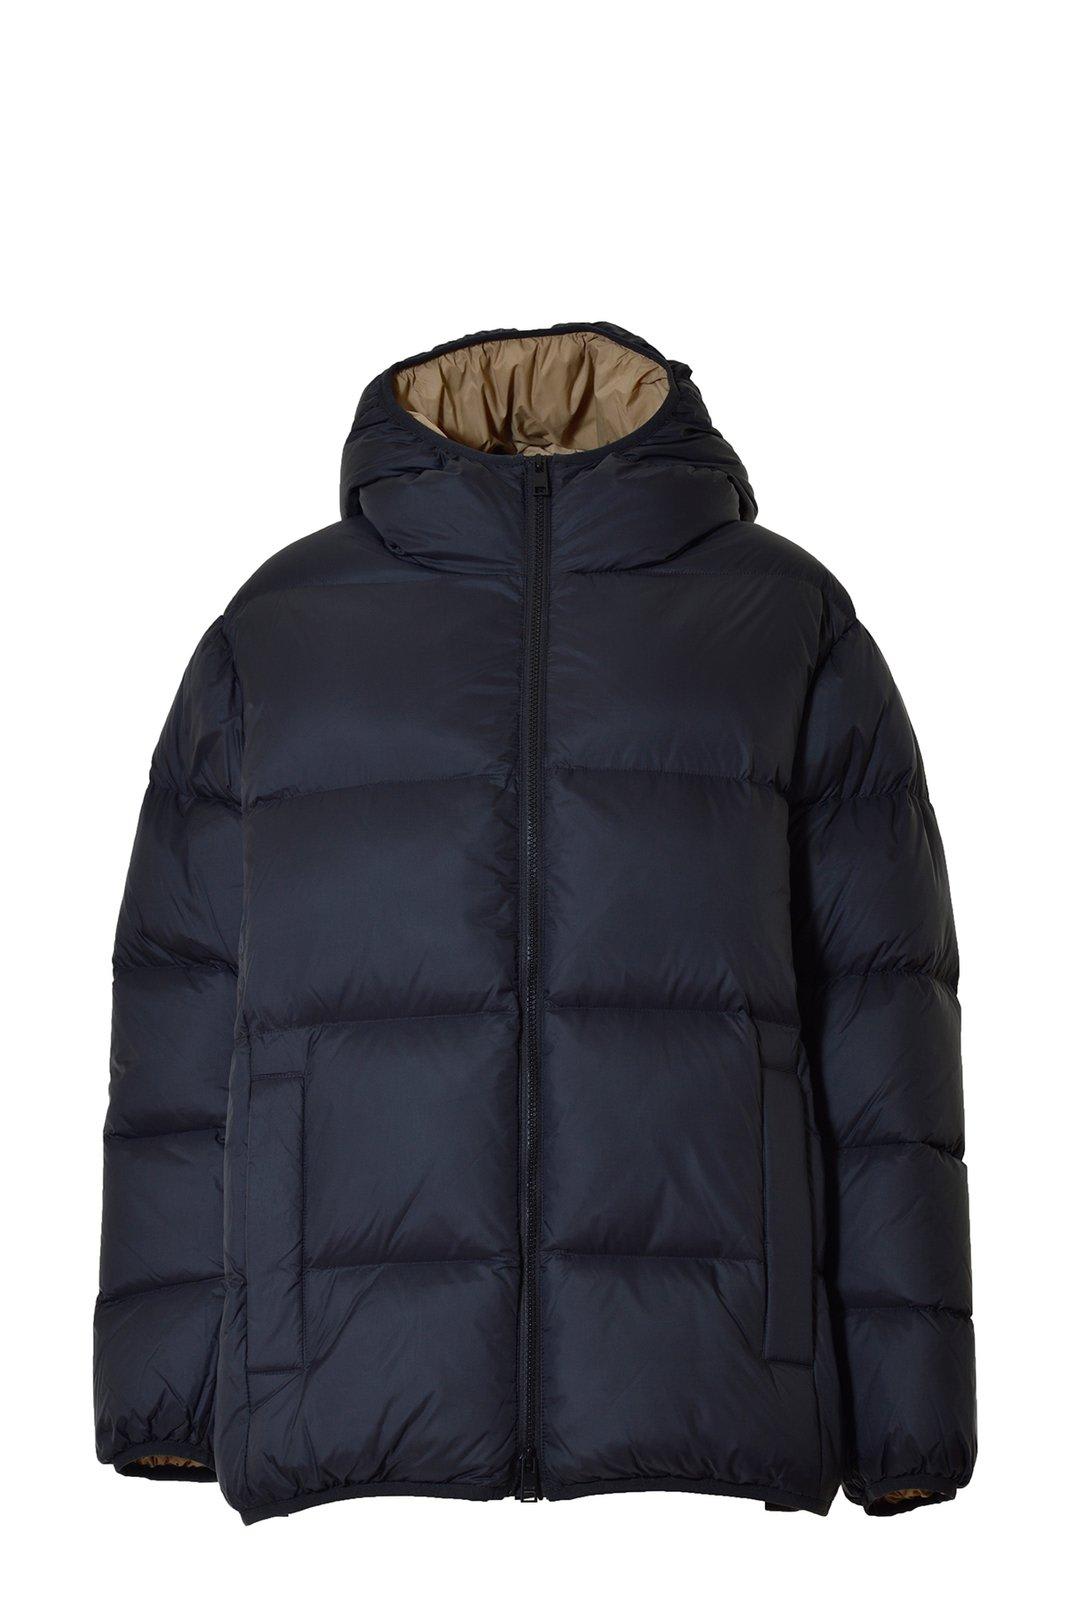 MSGM Zip-up Hooded Puffer Jacket